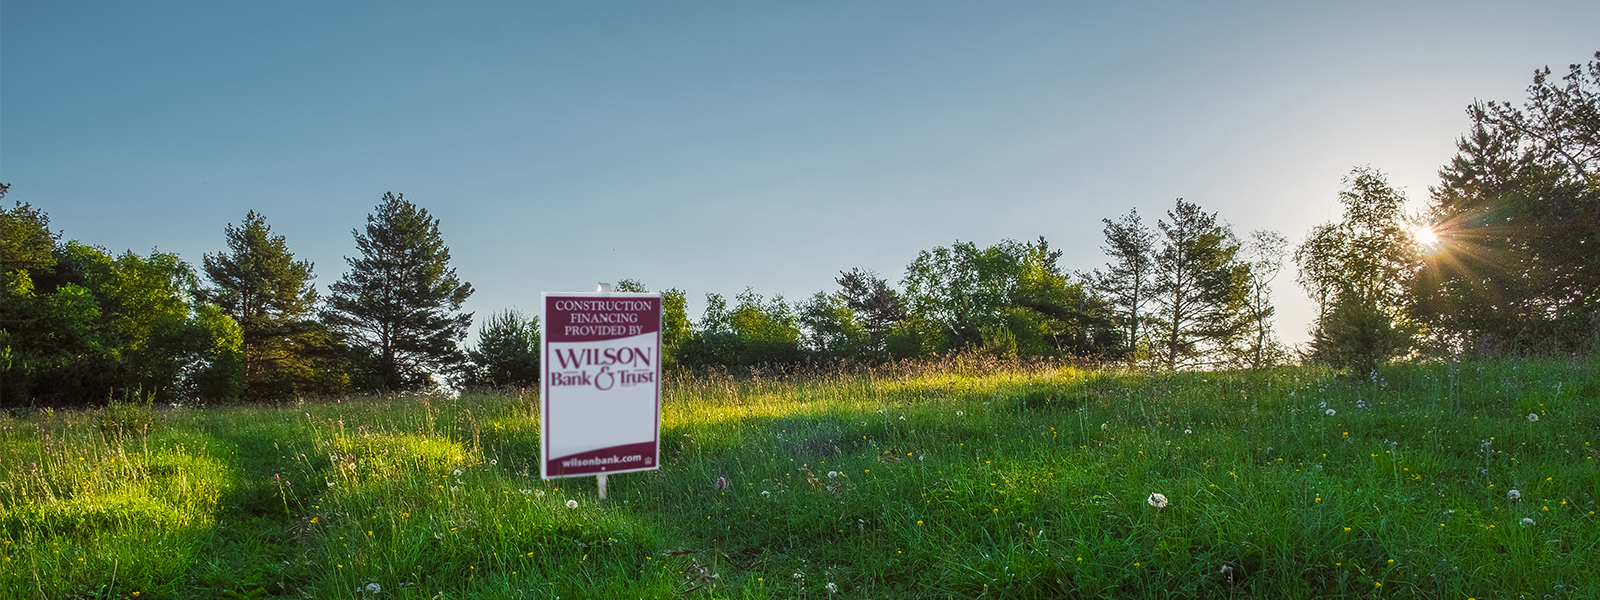 Wilson bank sign in a land lot